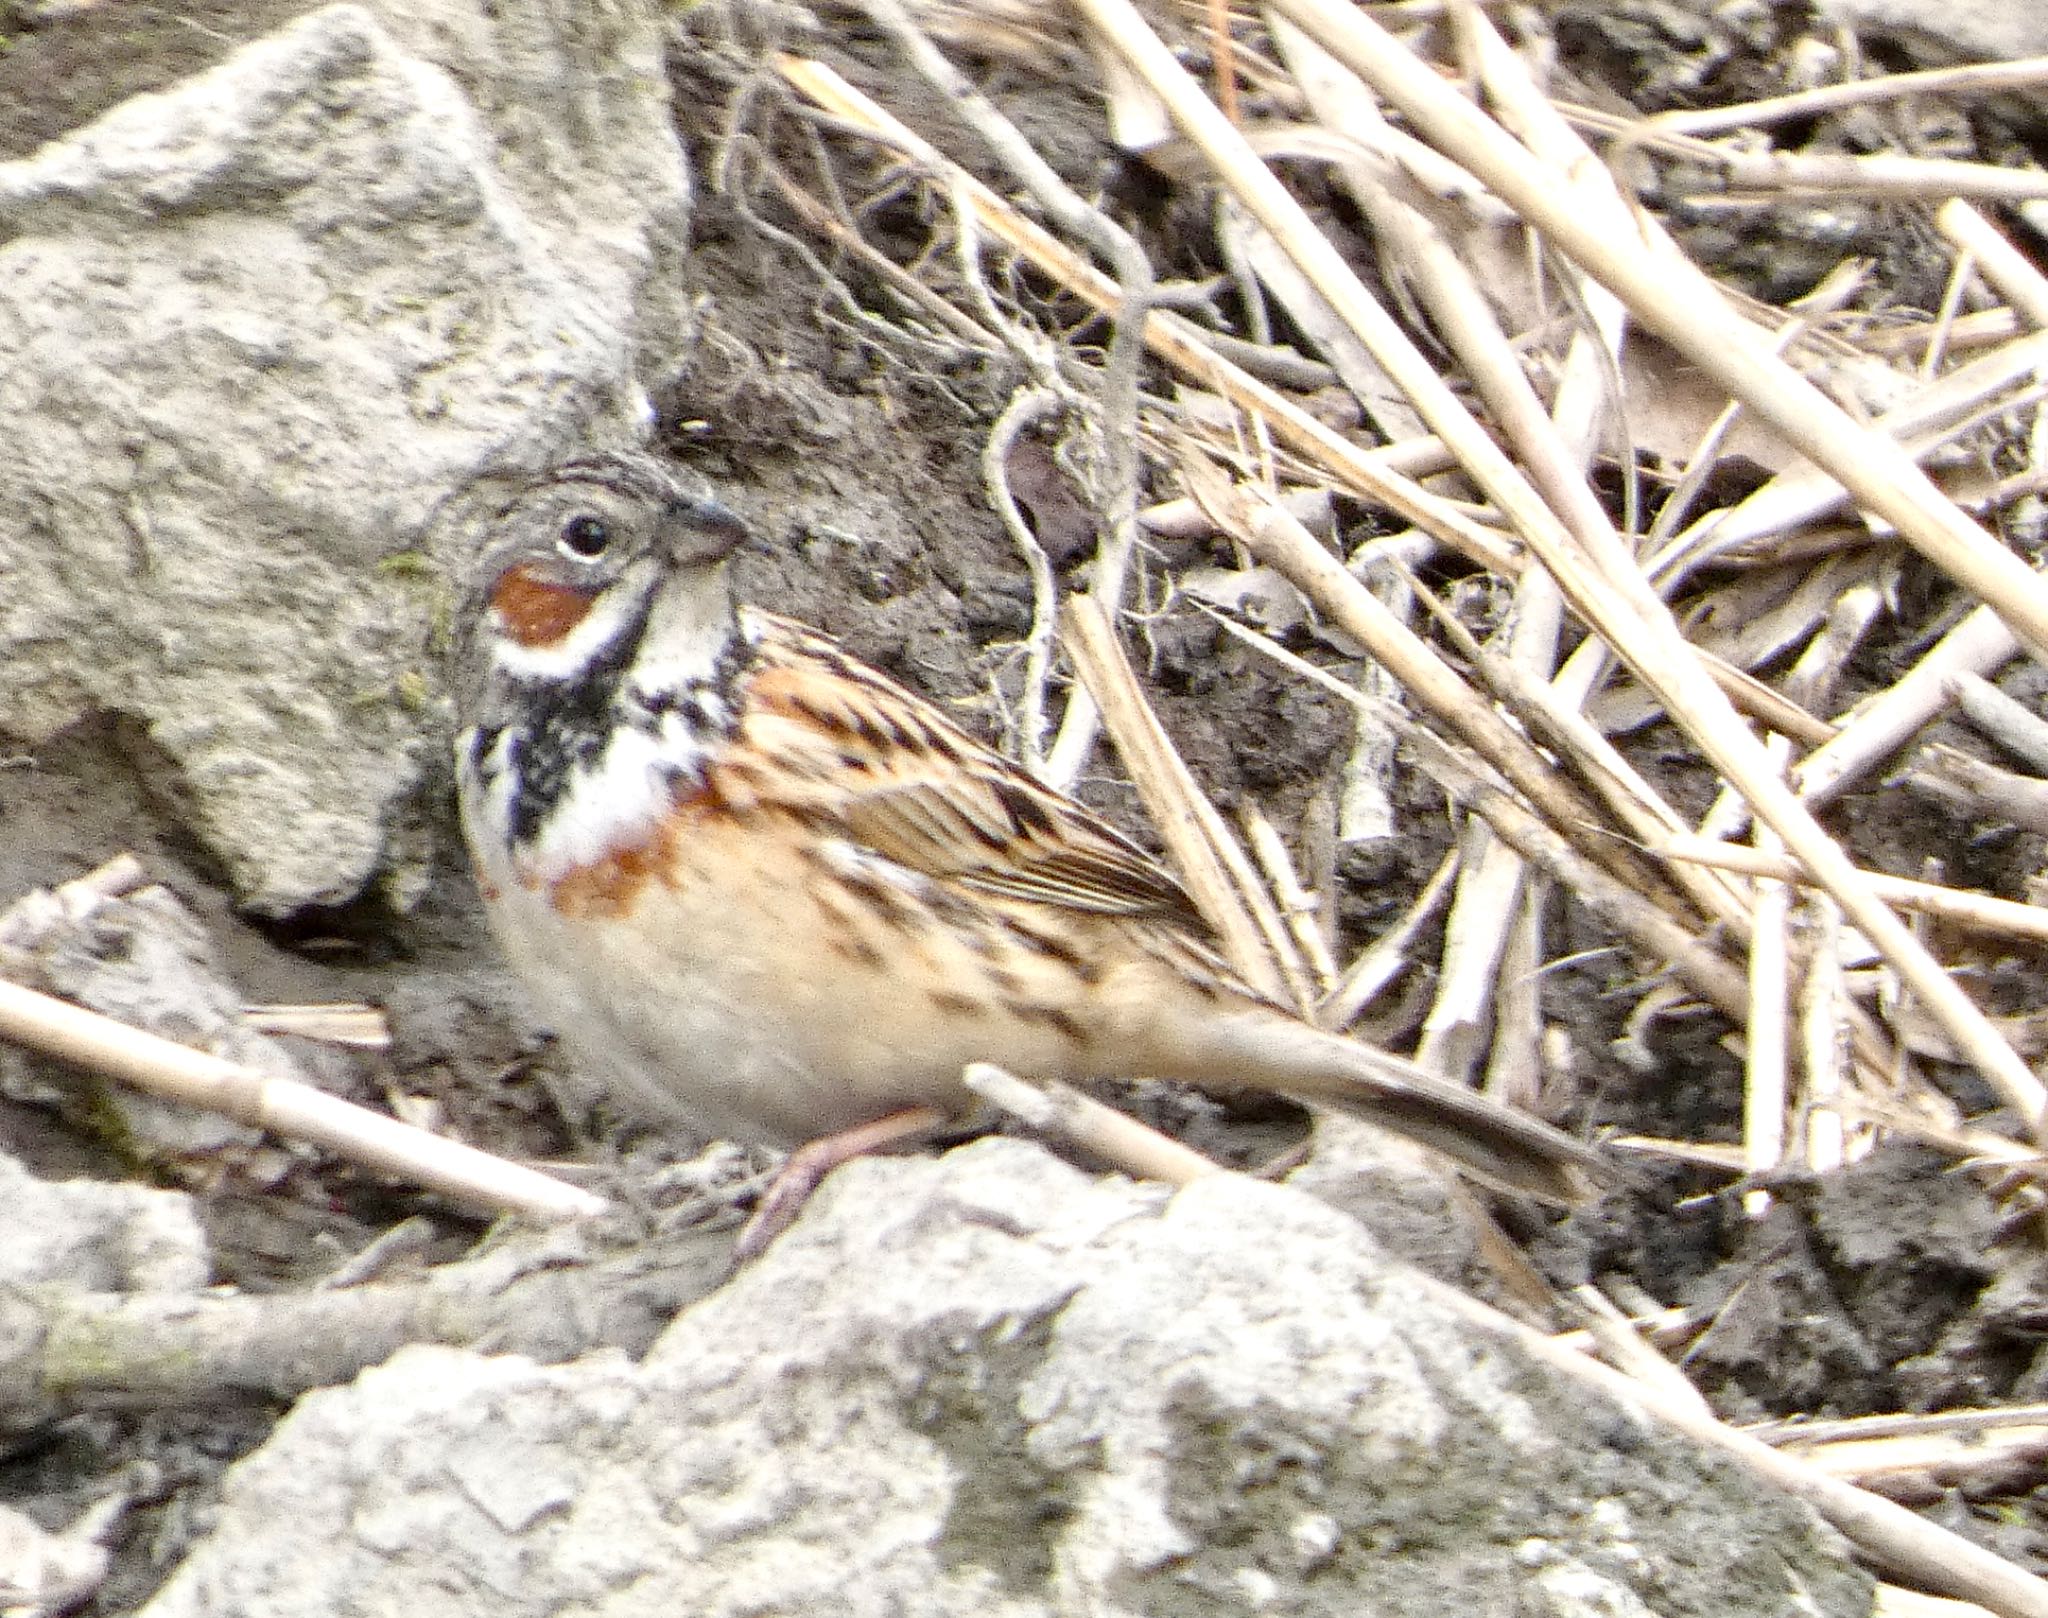 Chestnut-eared Bunting